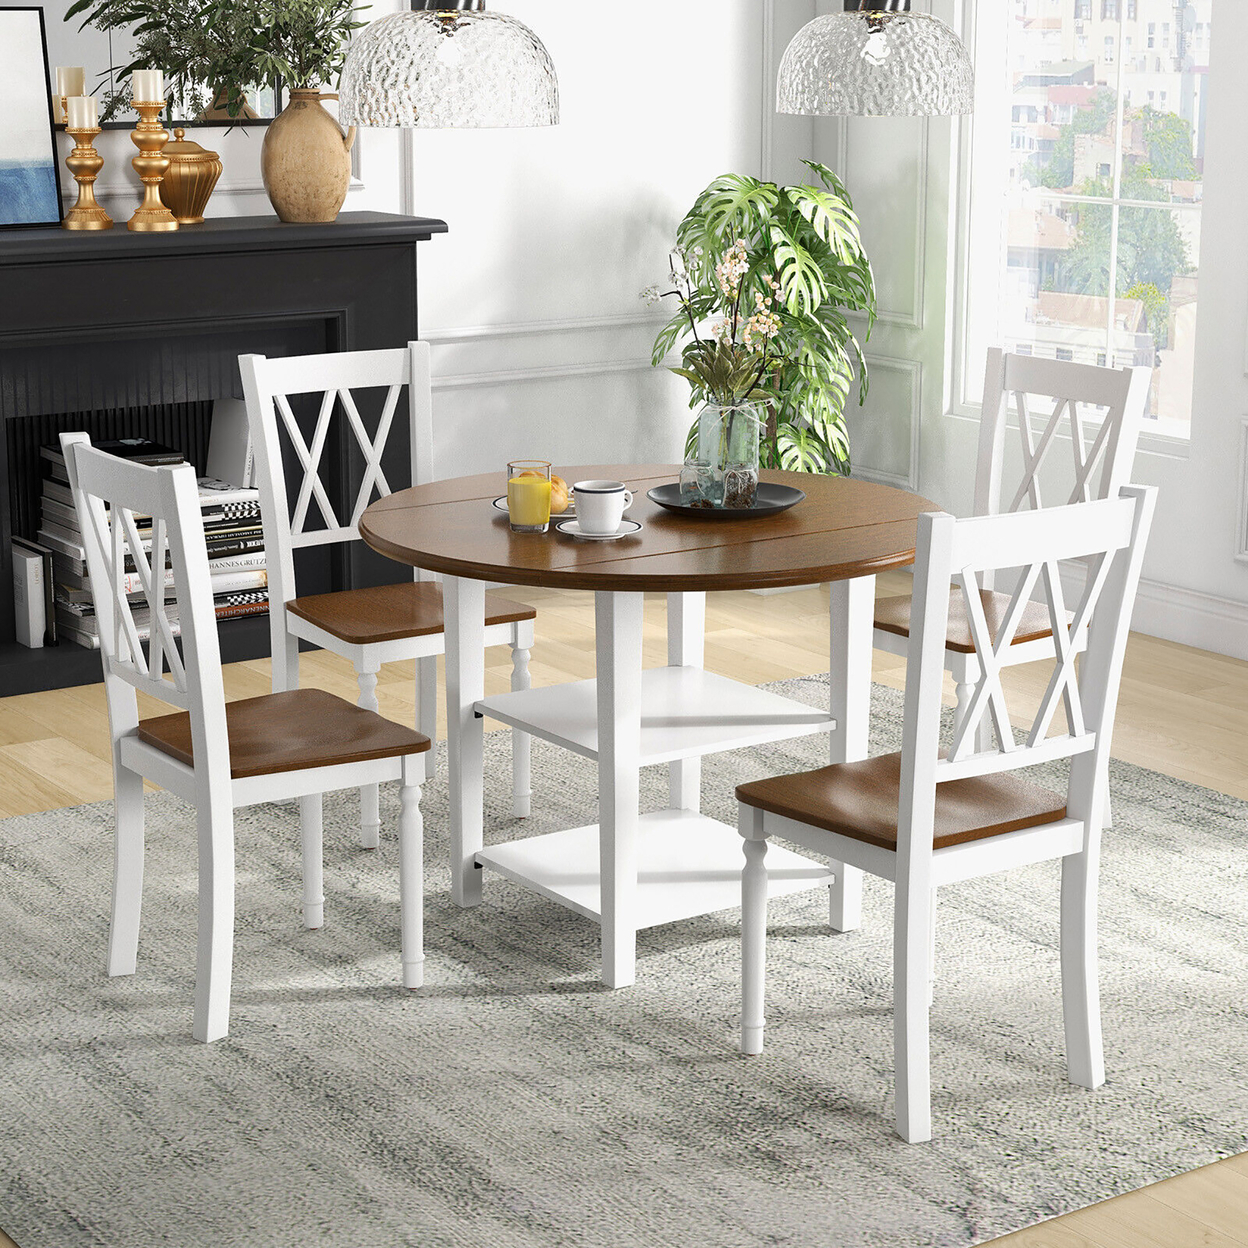 5 Piece Round Dining Kitchen Set W/ Drop Leaf Dining Table Folded & 4 Chairs